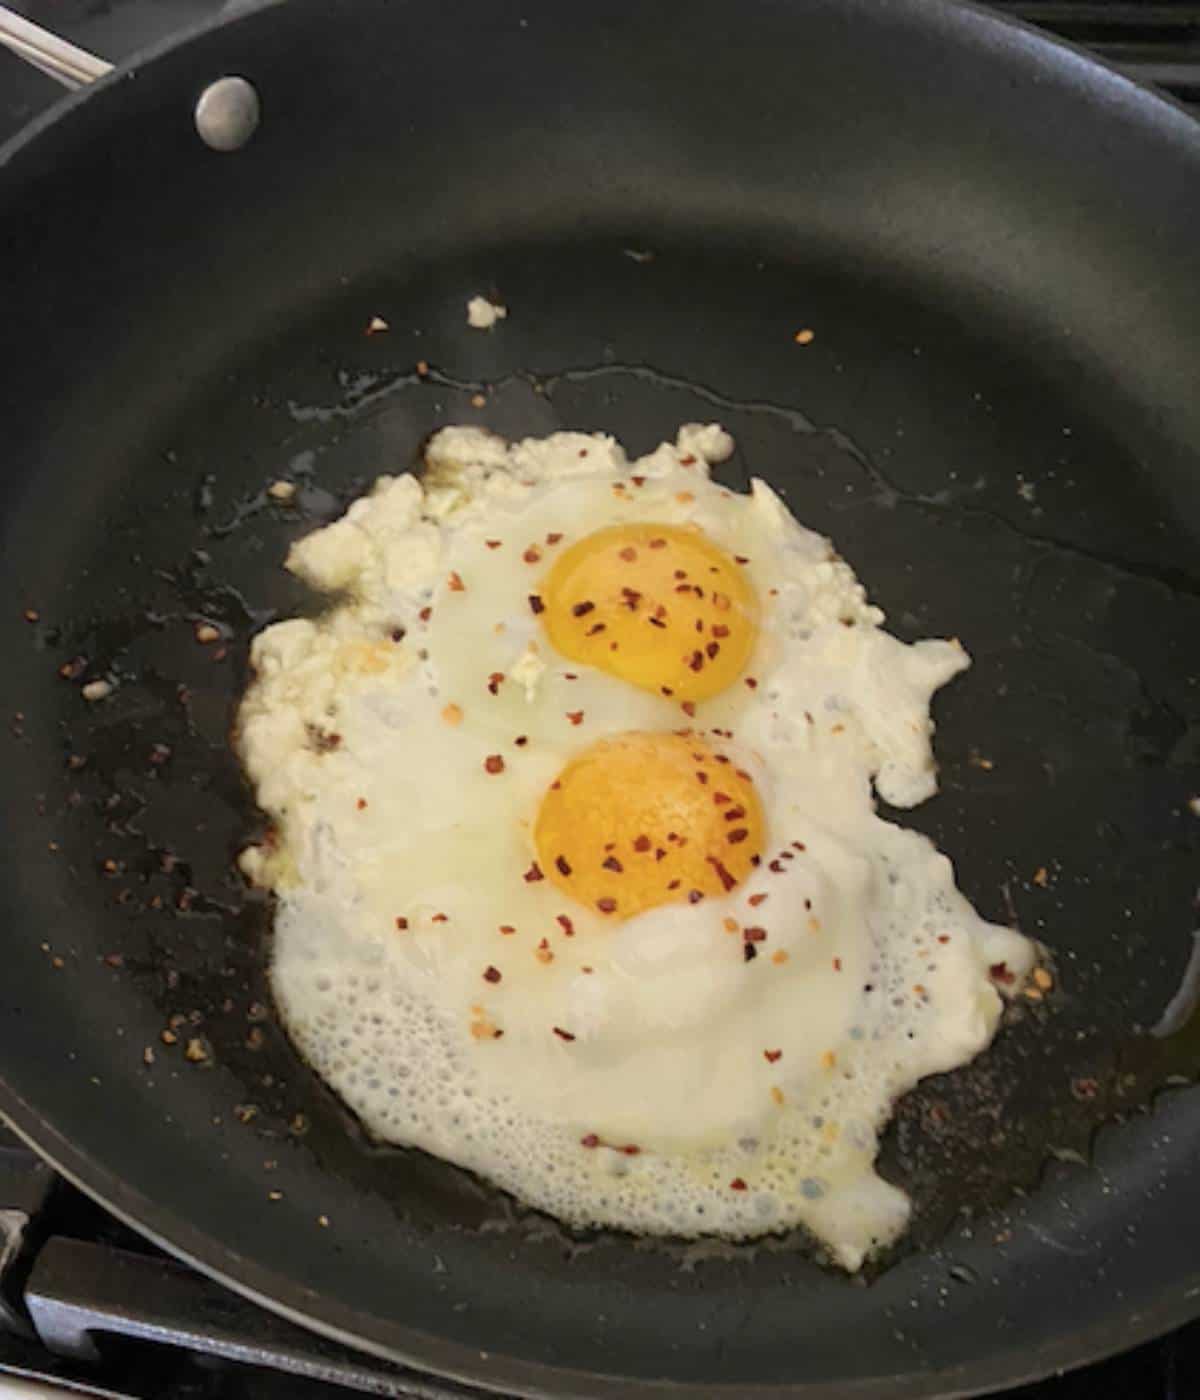 Olive Oil added into fried egg pan.